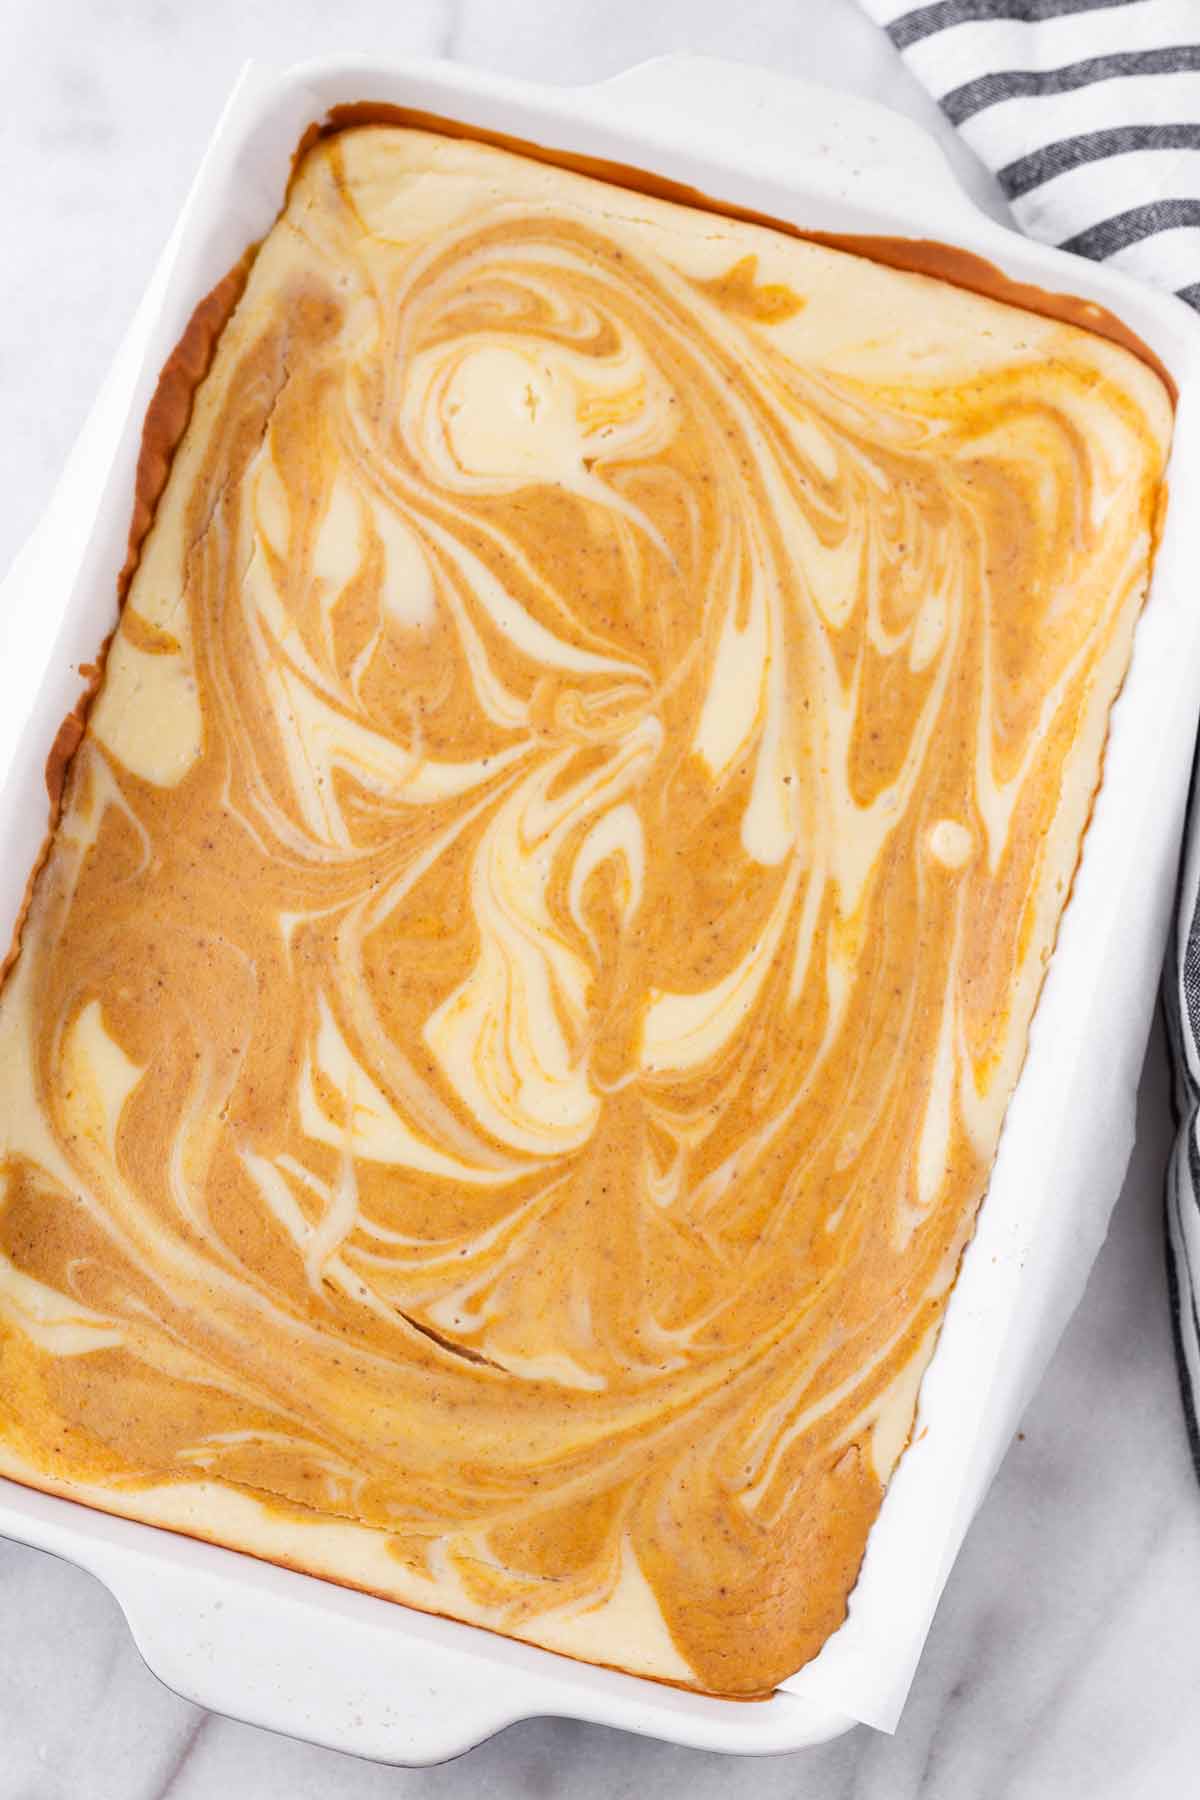 swirled cheesecake right out of the oven